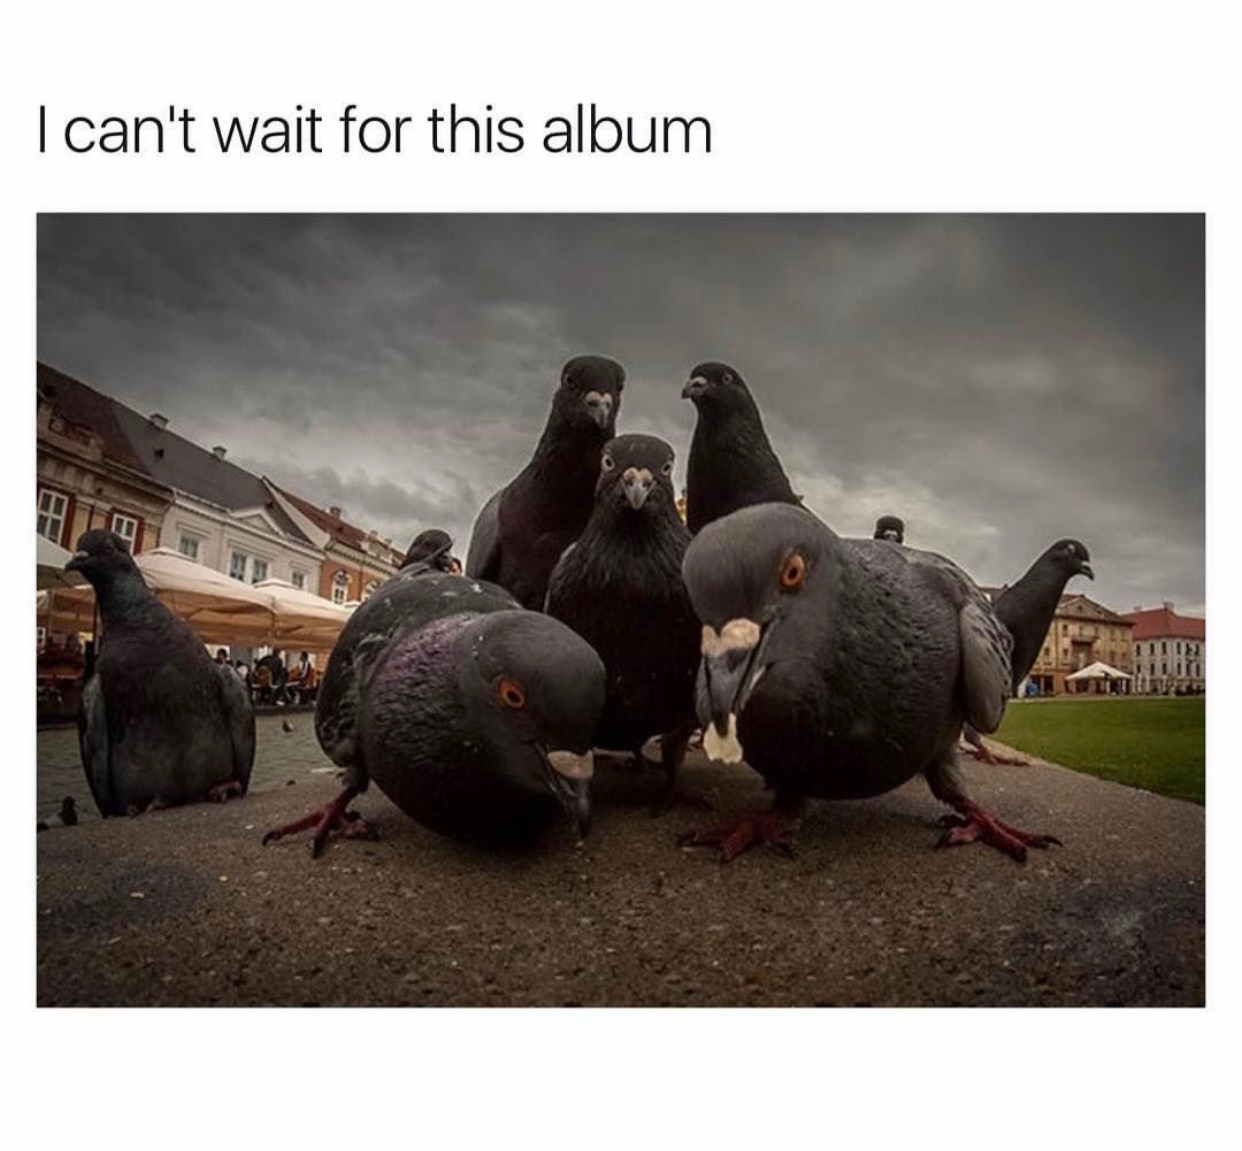 these pigeons look like they - I can't wait for this album